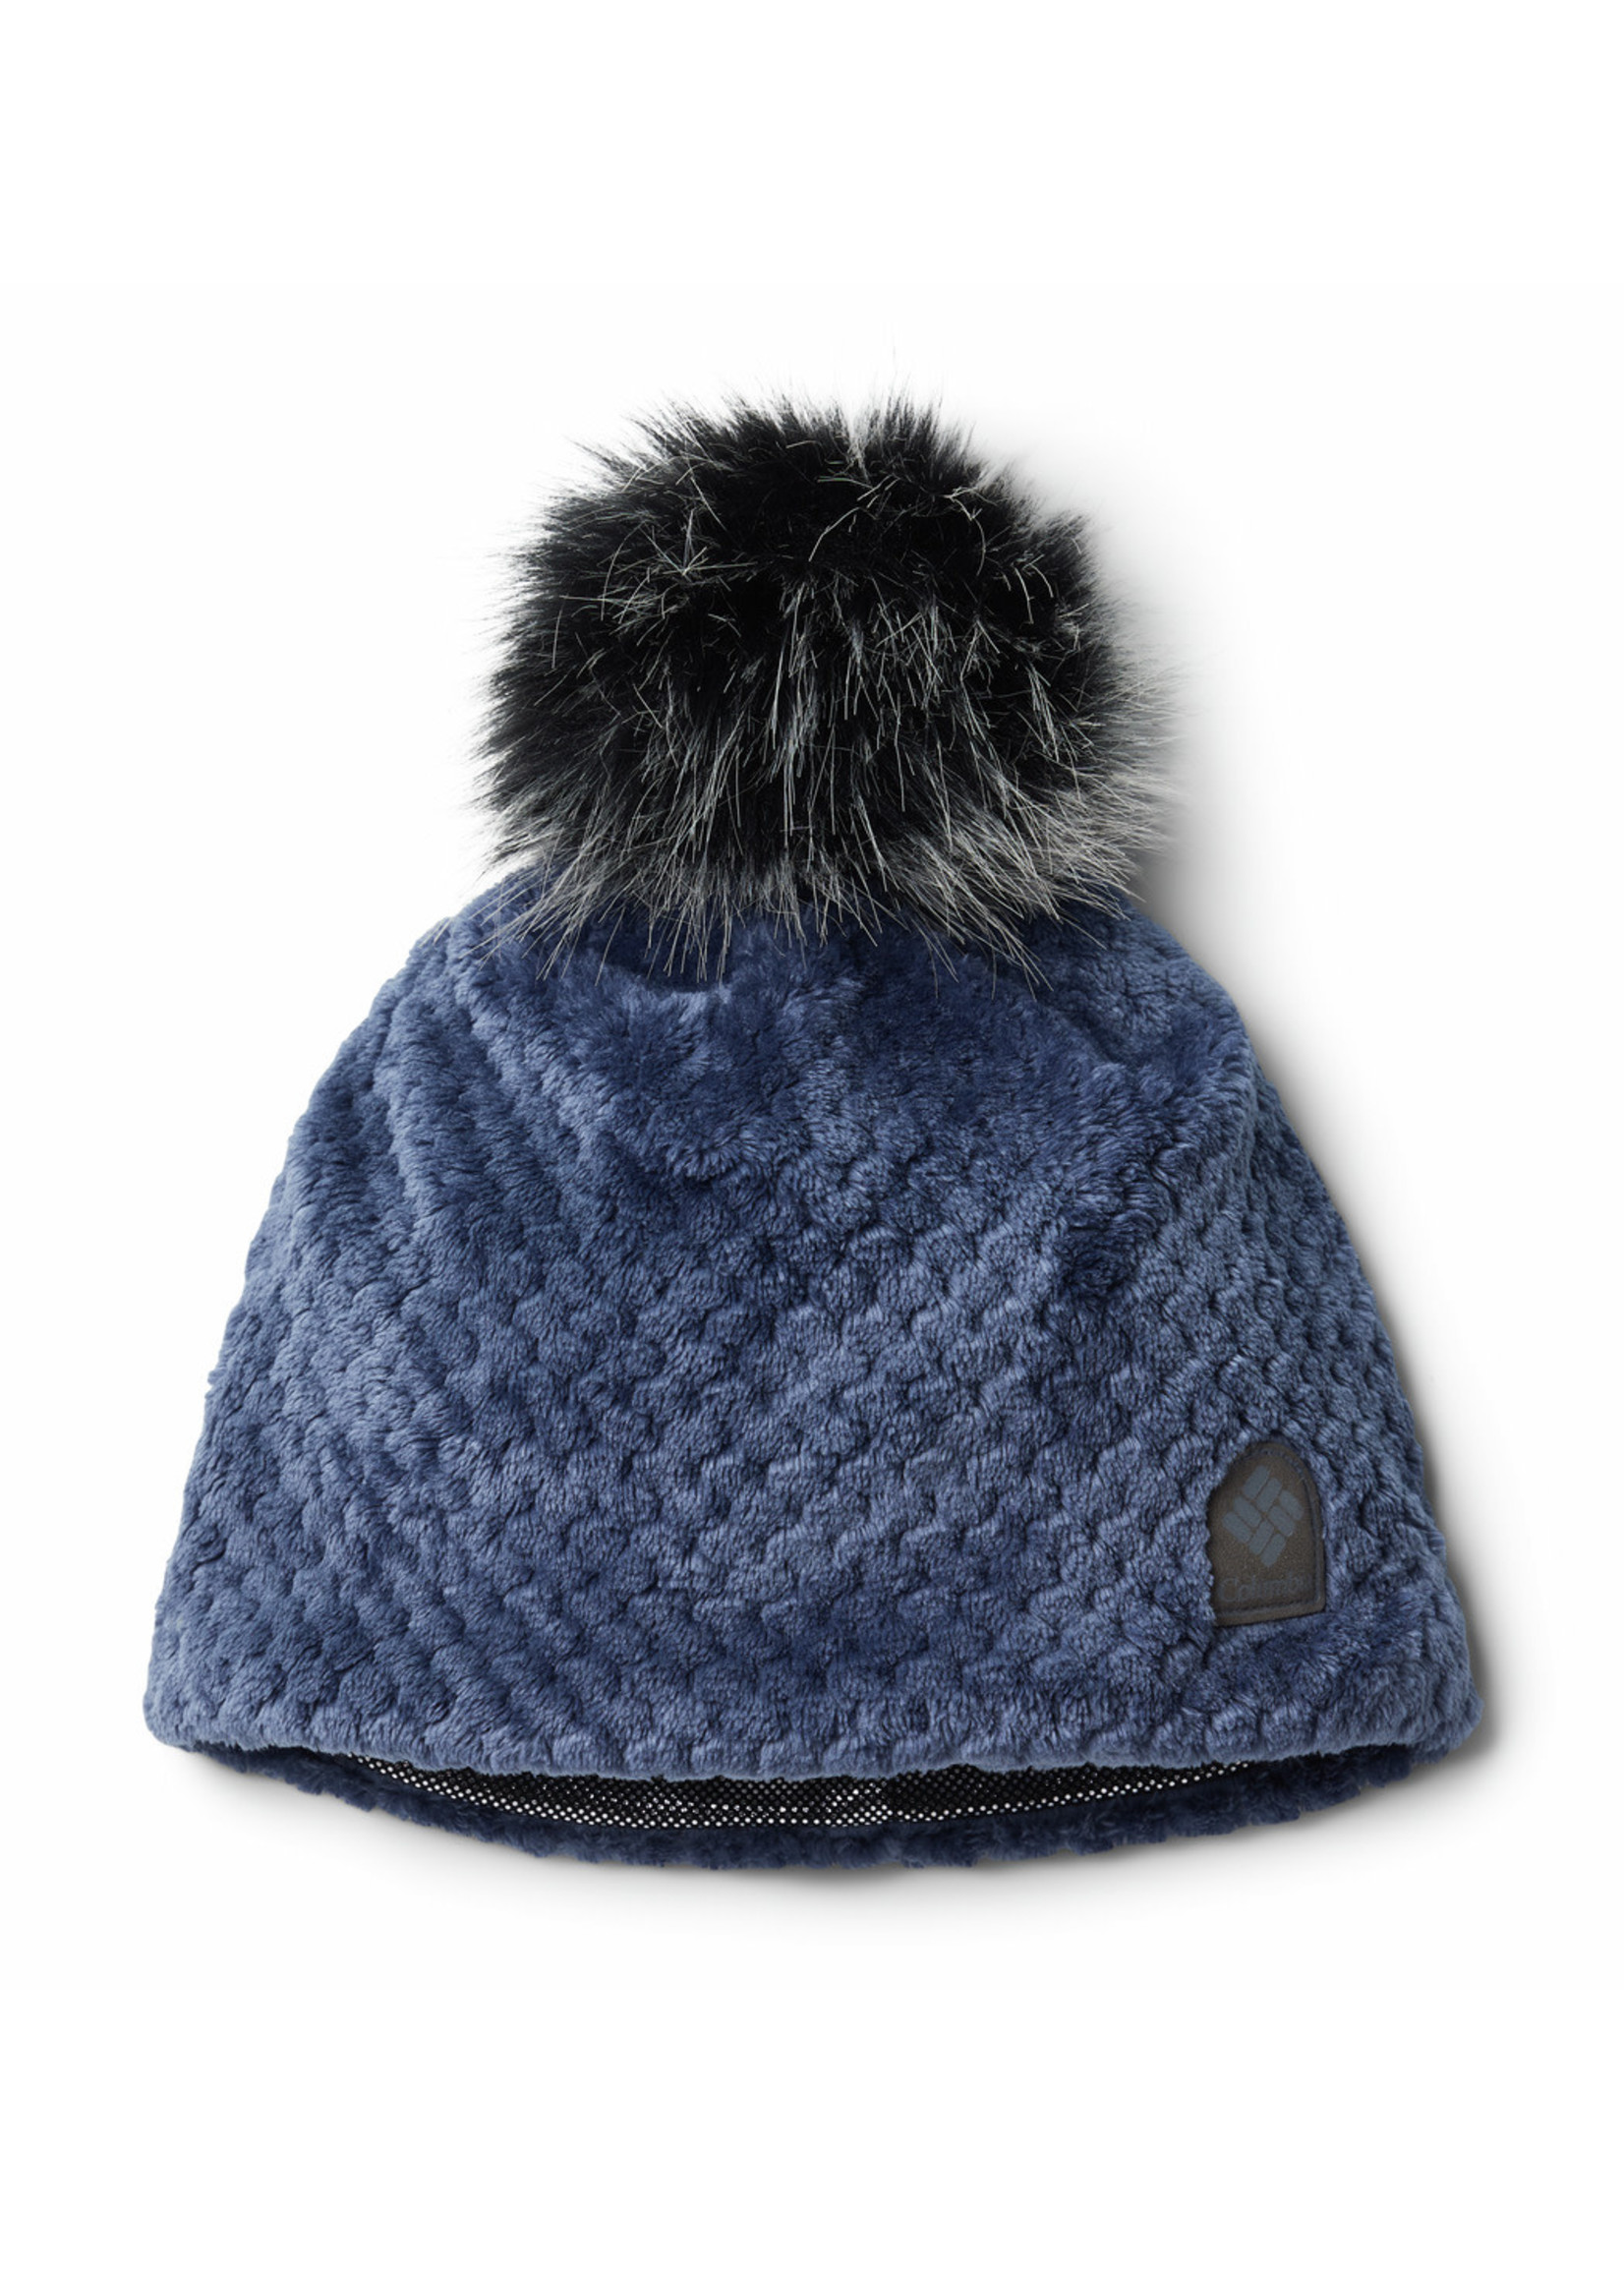 COLUMBIA Tuque FIRE SIDE™ (Femme)